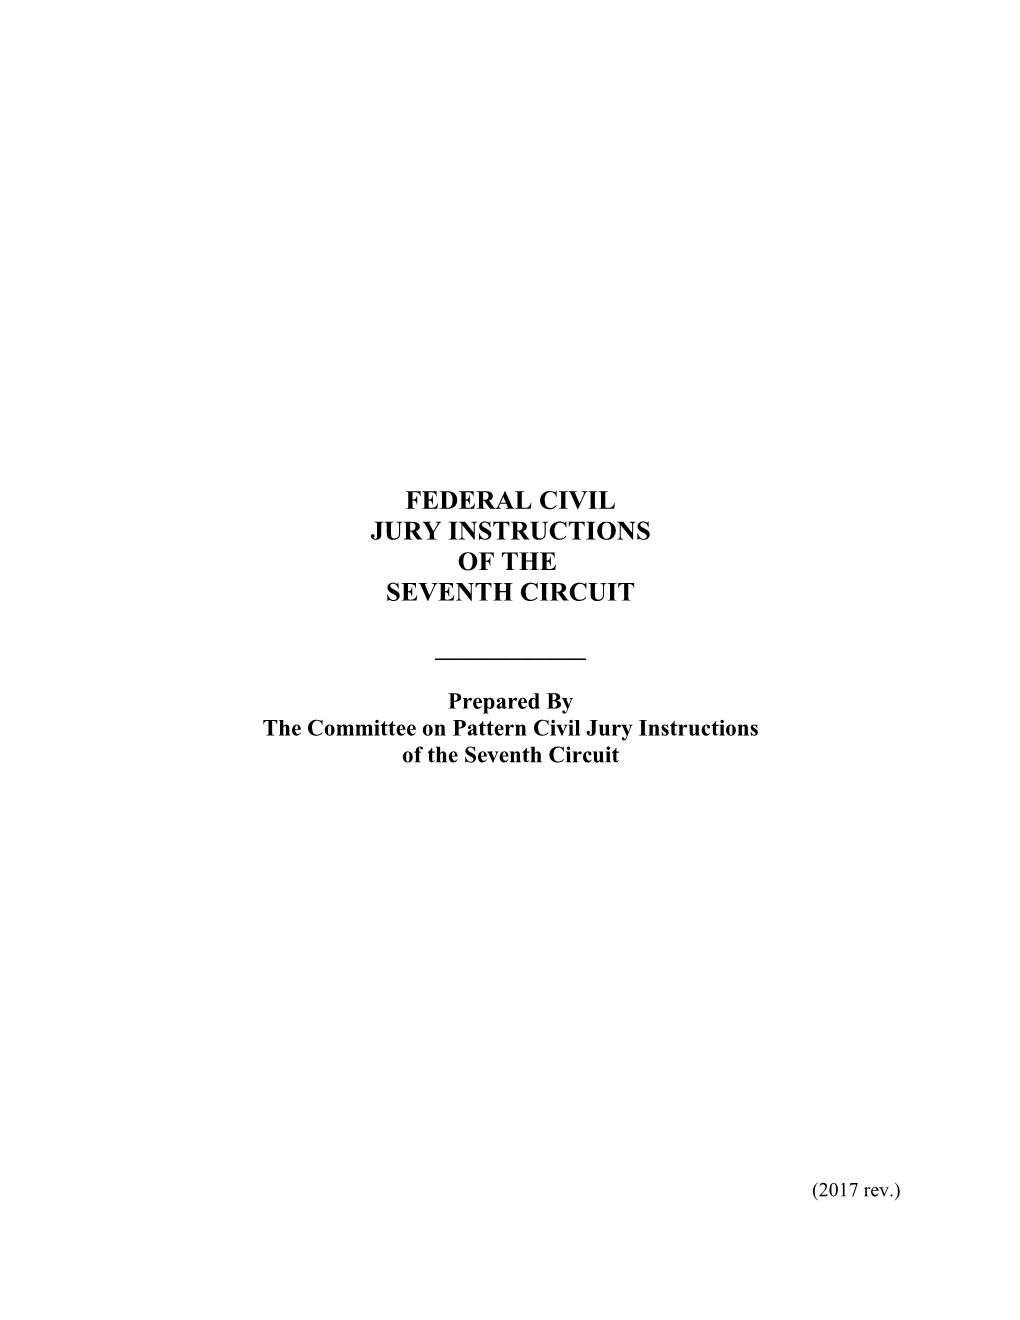 Pattern Civil Jury Instructions of the Seventh Circuit